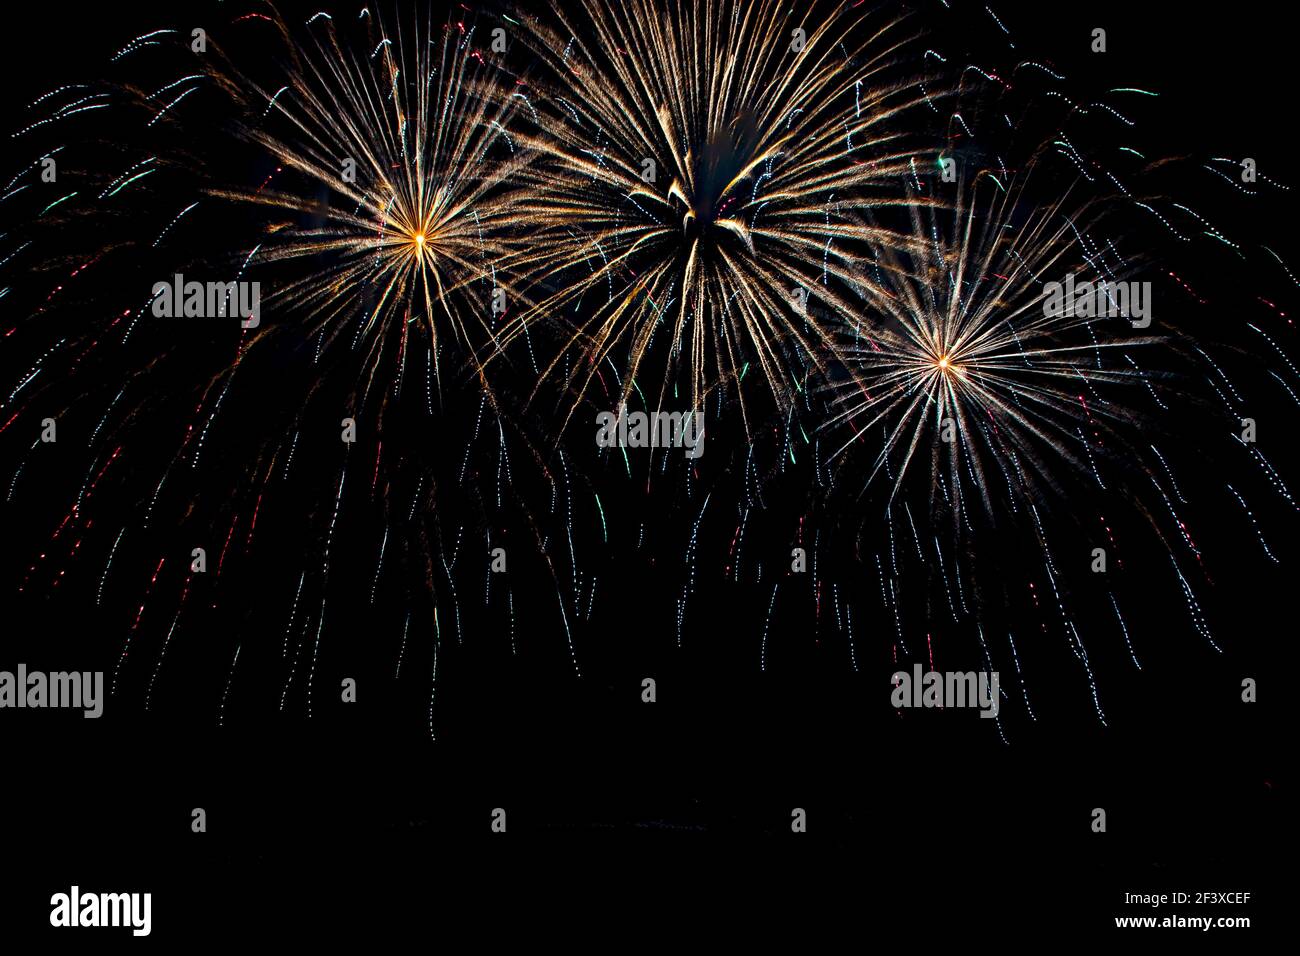 Delicate gold fireworks in a night sky. Isolated on black. Stock Photo